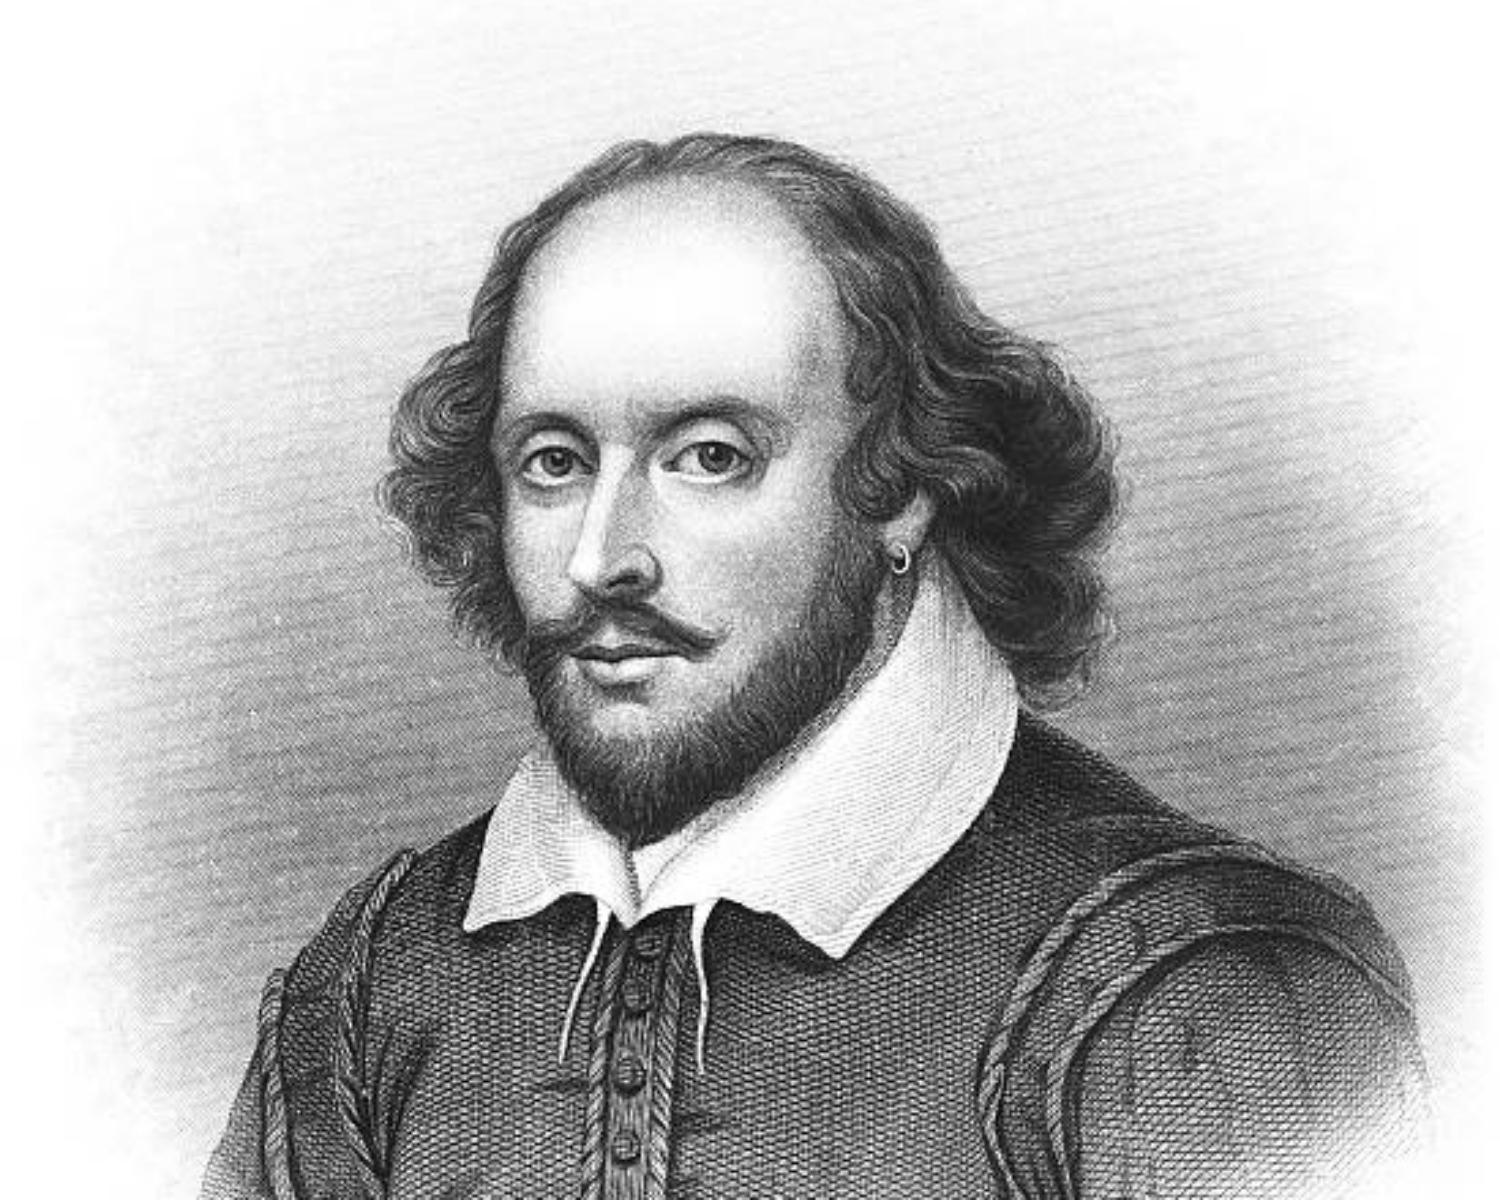 WILLIAM SHAKESPEARE                             A.K.A 'THE BARD'